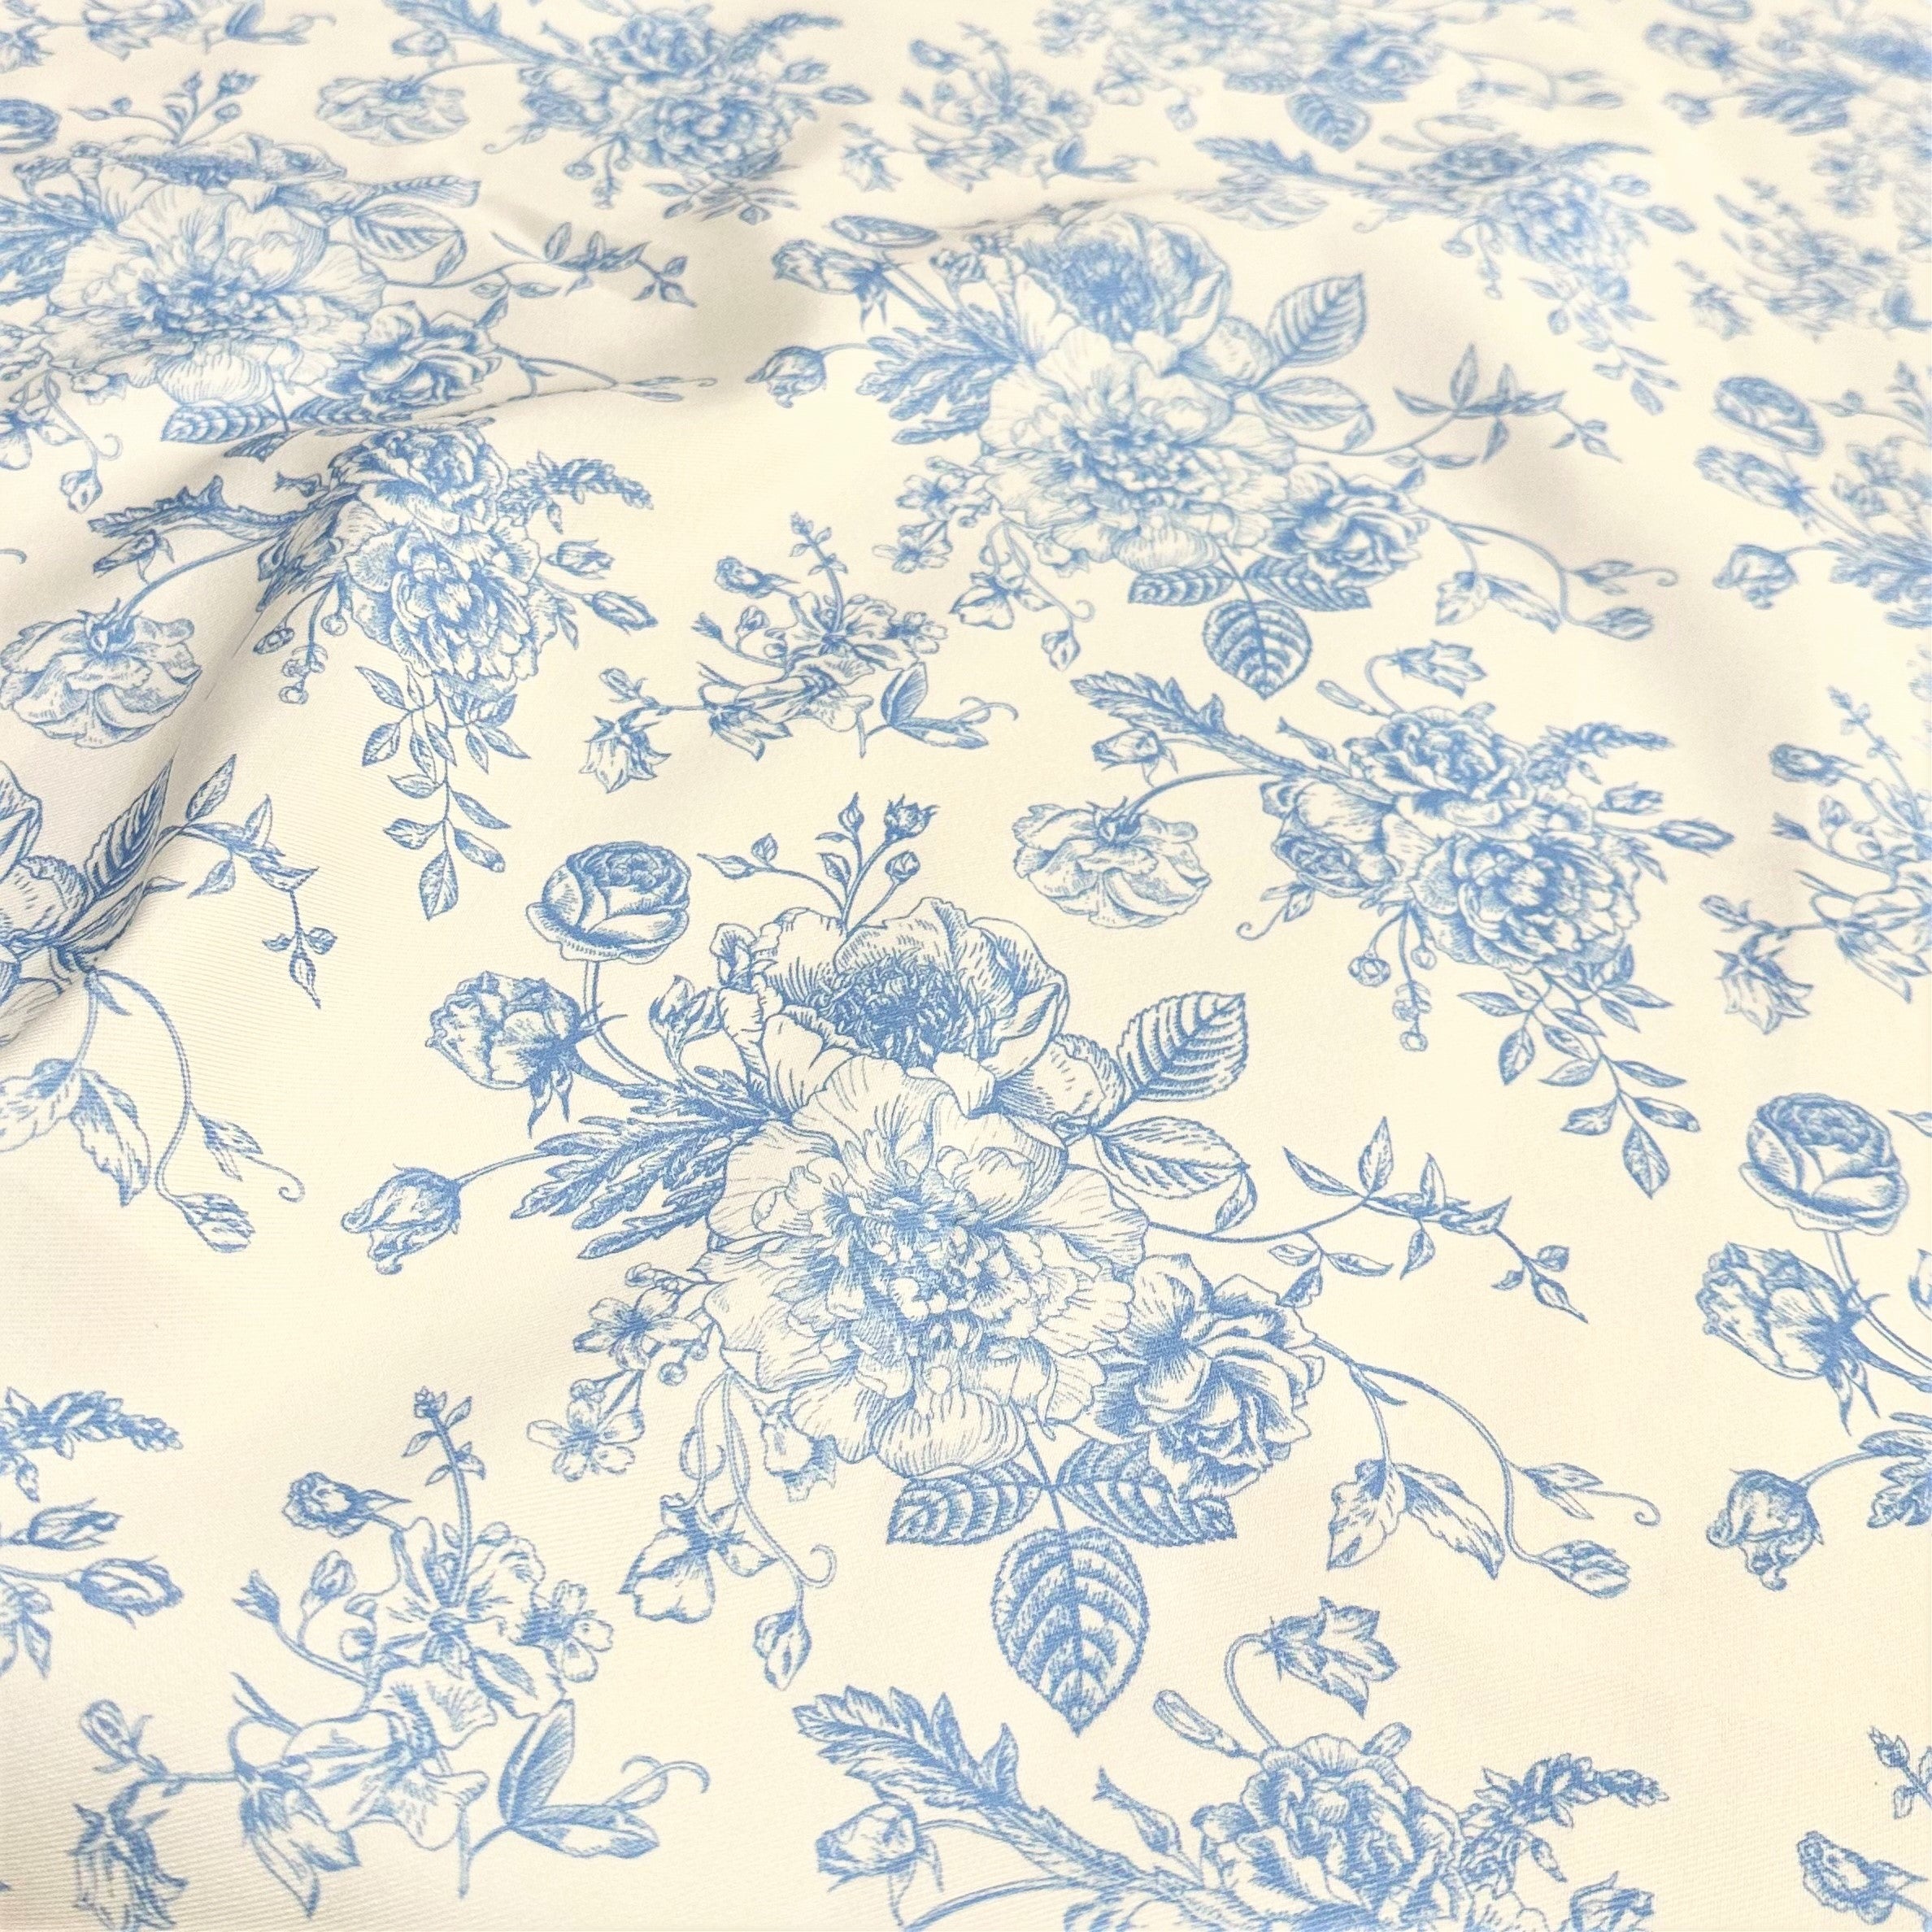 10 Yards French Stof Cotton Toile Designer Fabric in Blue Festin